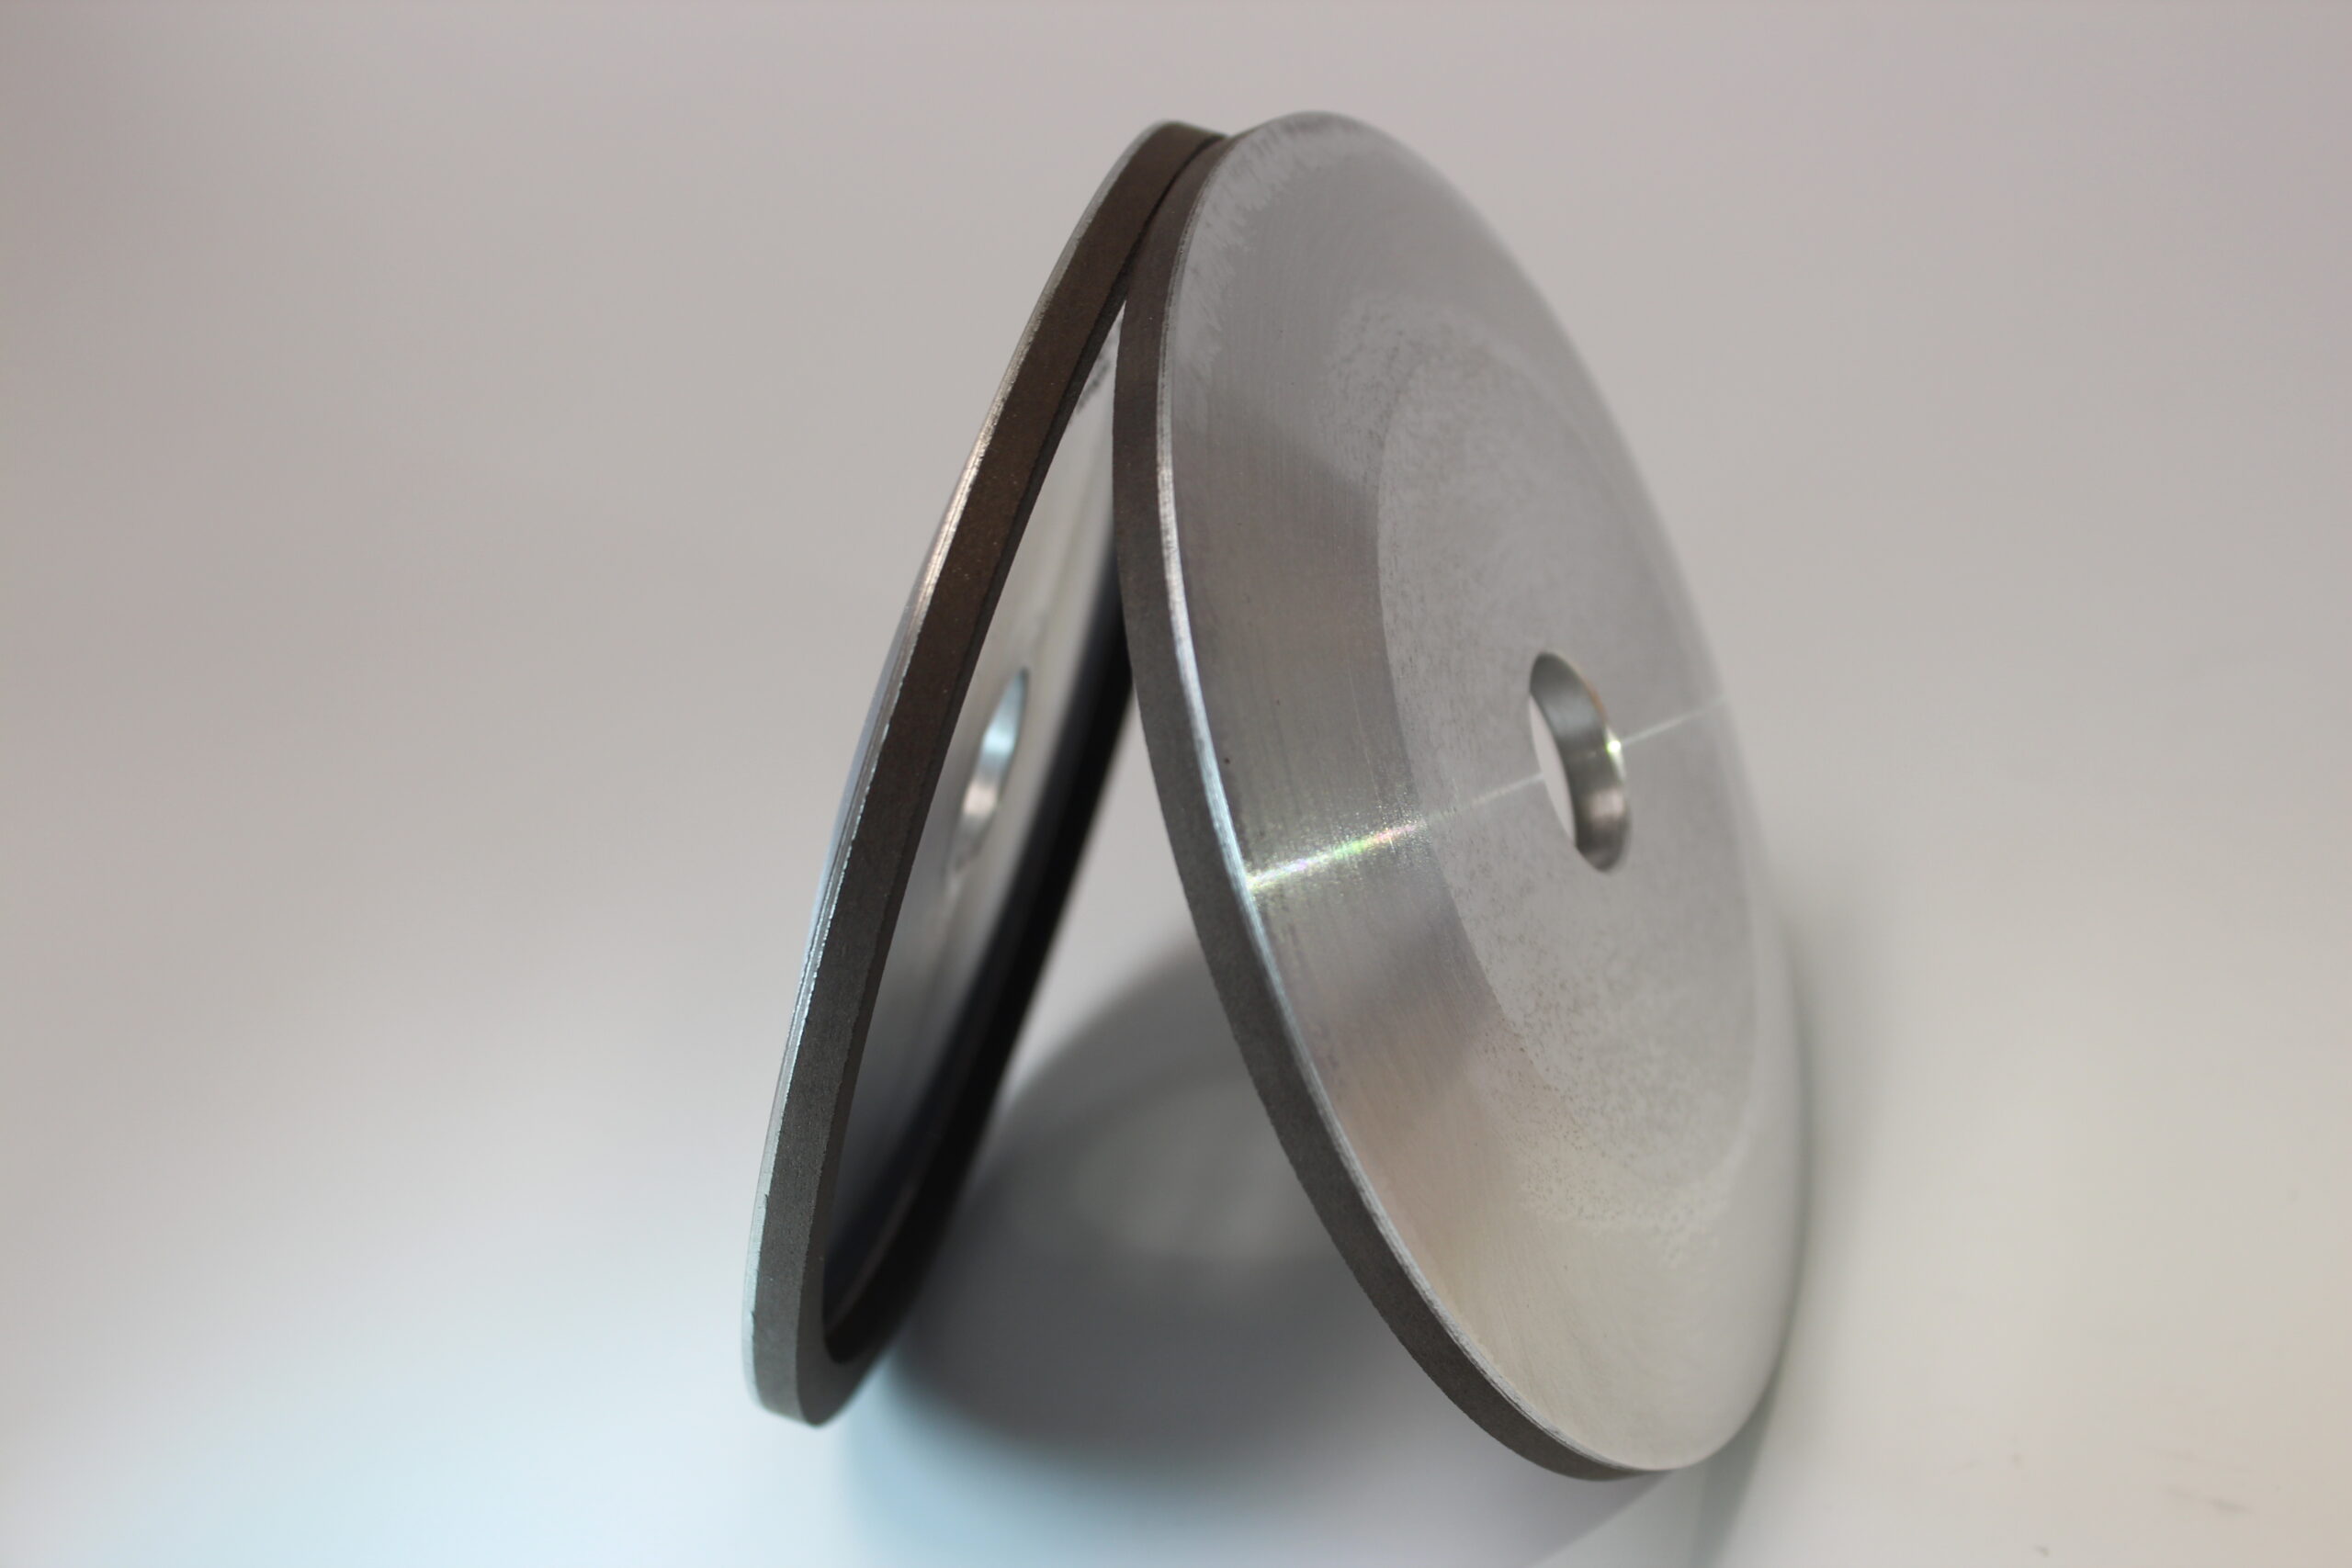 Resin Bonded Diamond Grinding Wheels That Can Be Customized